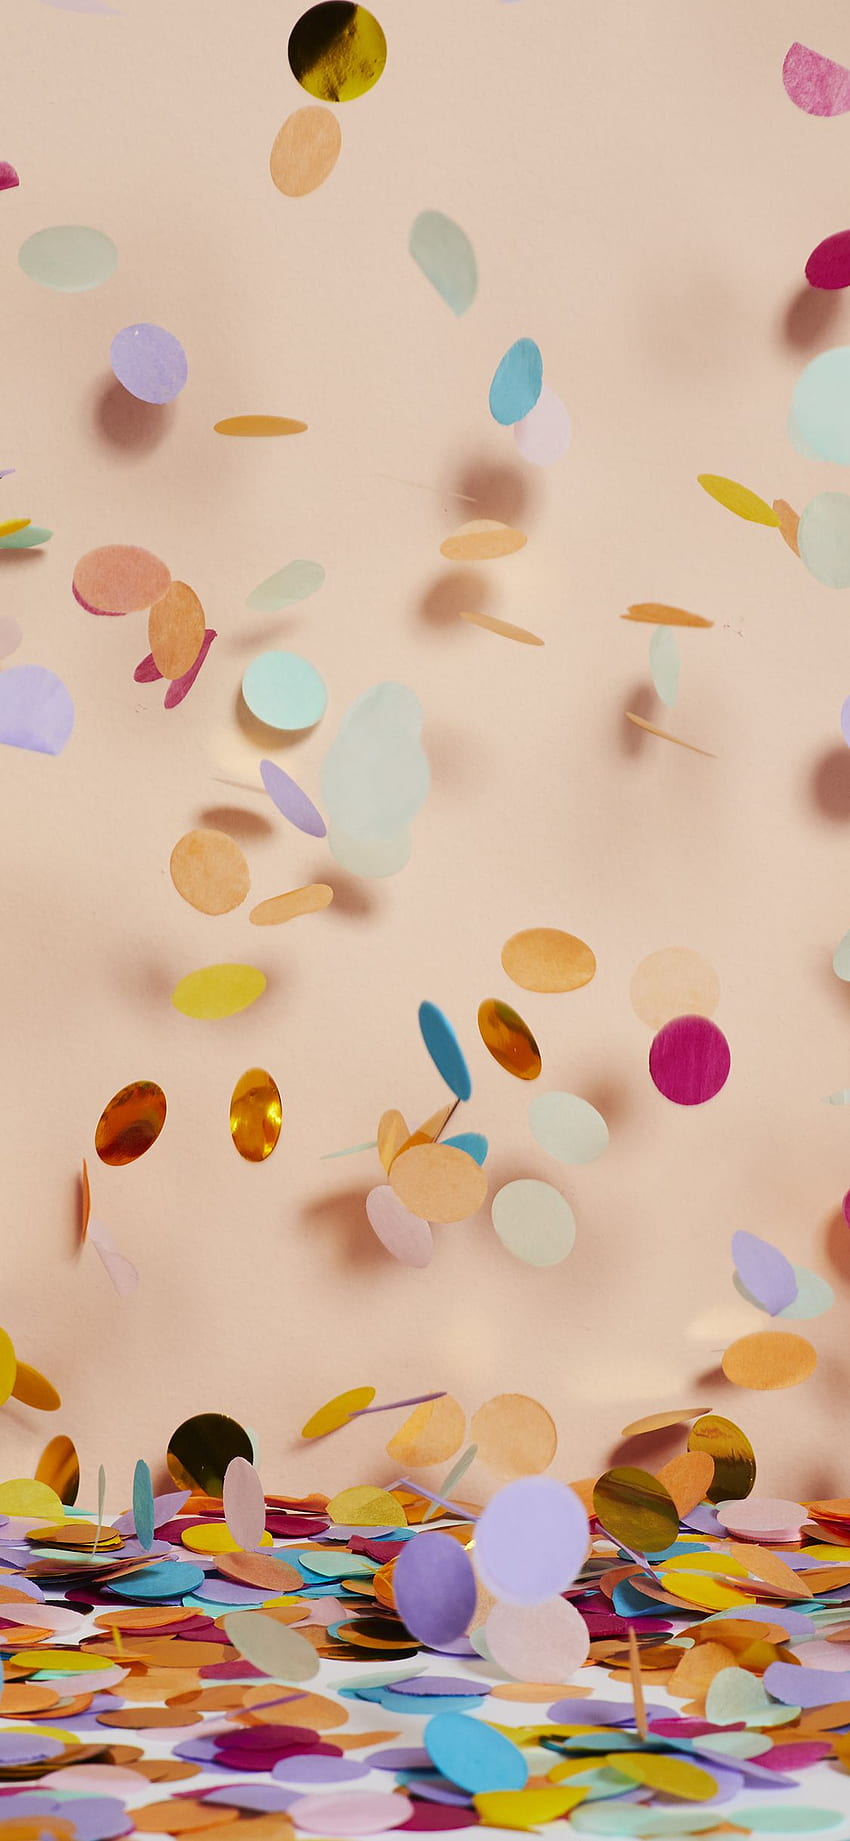 New Year, New Phone: Confetti Mobile - Front + Main HD phone wallpaper